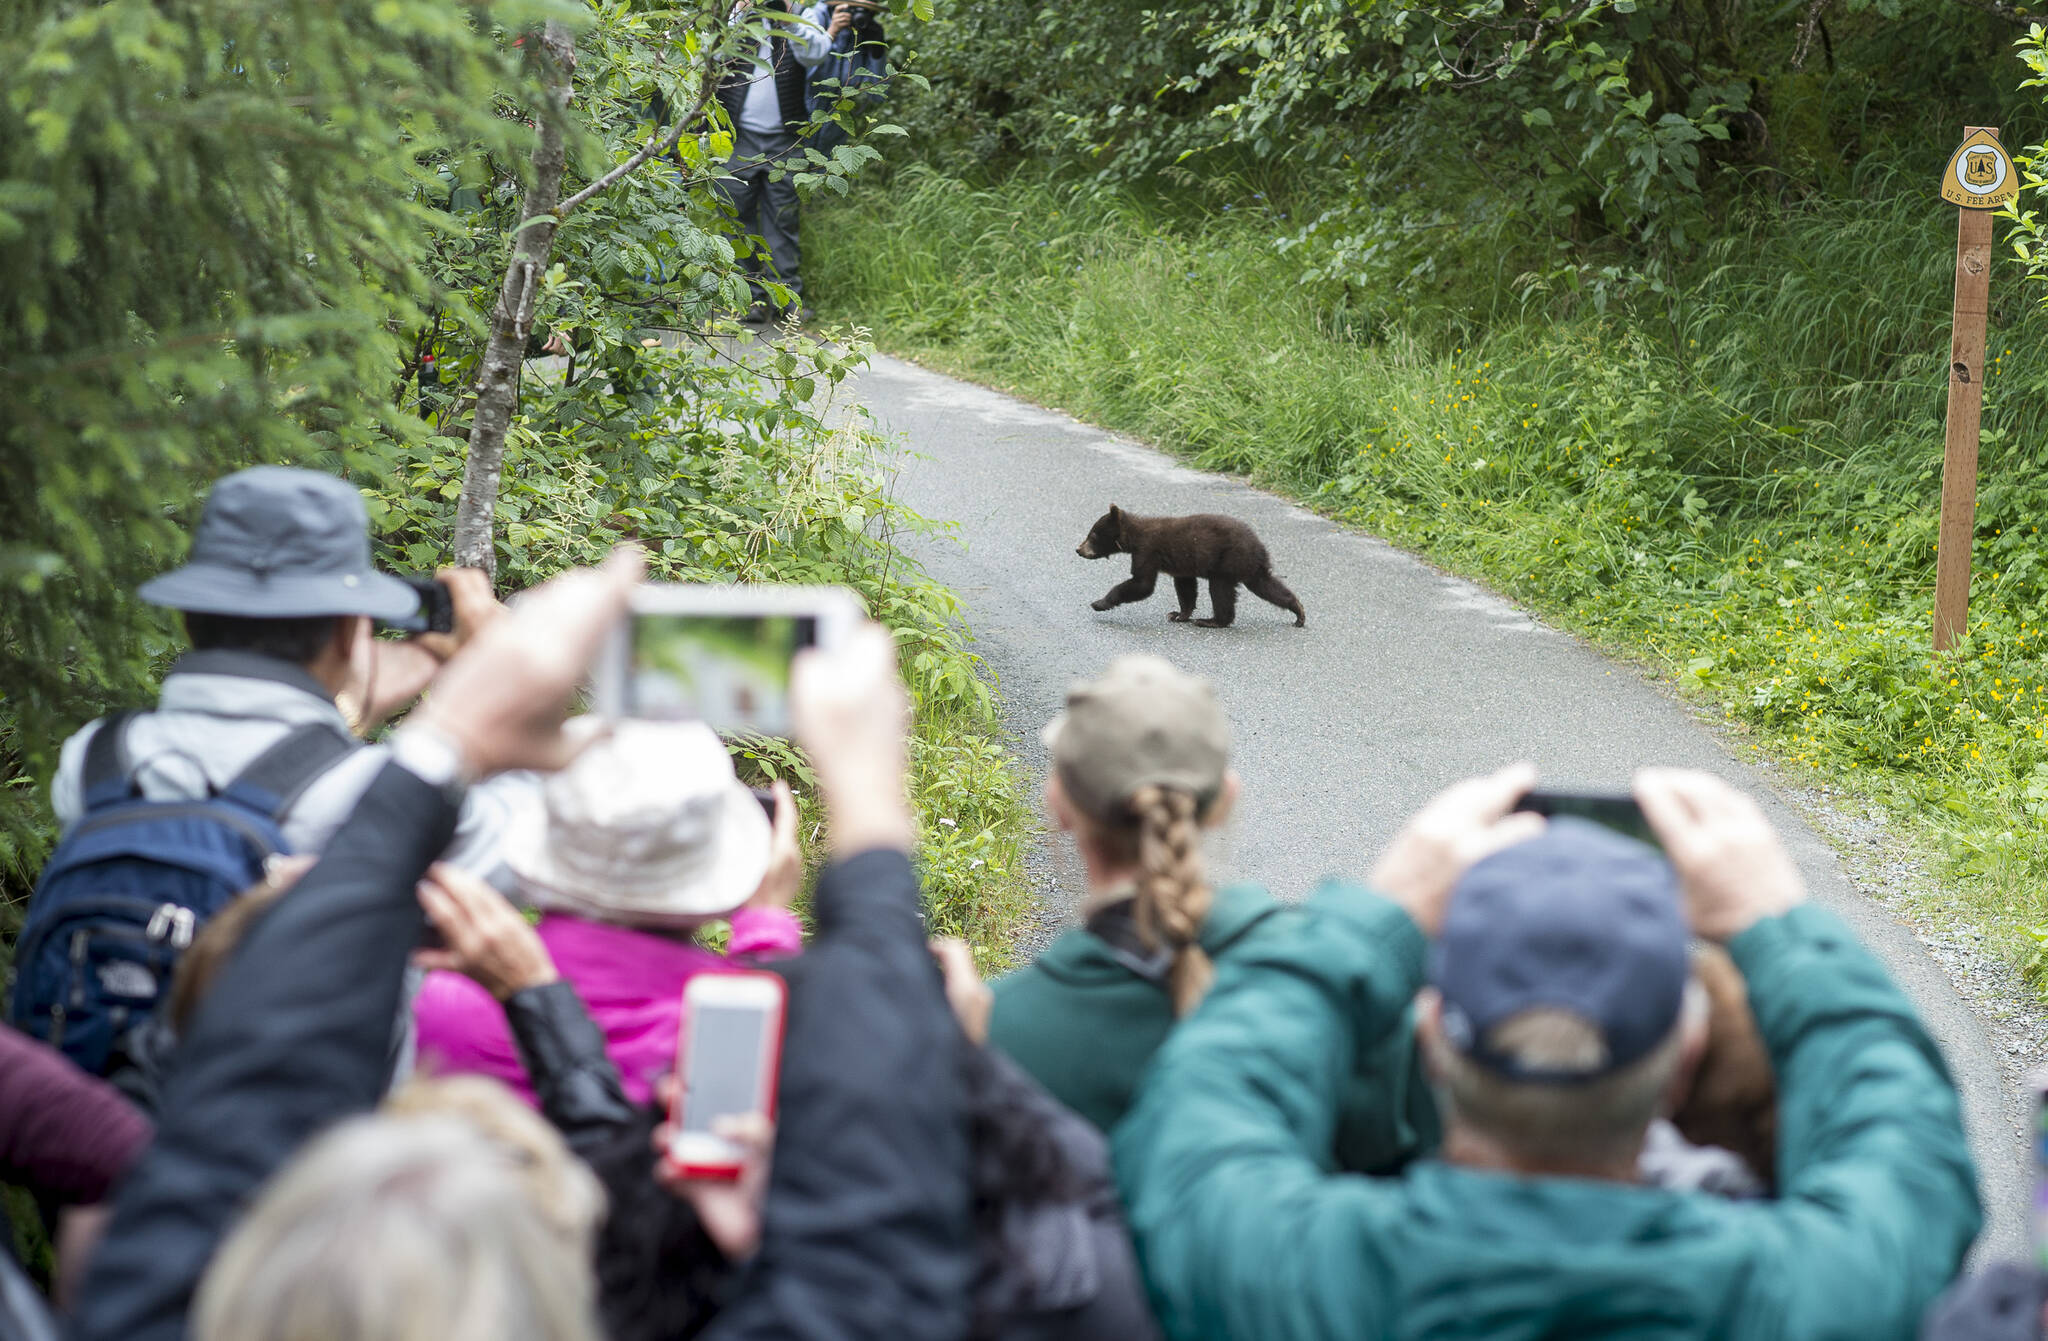 Tourists watch as one of two cubs belonging to an 18-year-old sow black bear crosses the path between groups of tourists visiting the Mendenhall Glacier Visitor Center on Wednesday, July 18, 2018. (Michael Penn / Juneau Empire File)